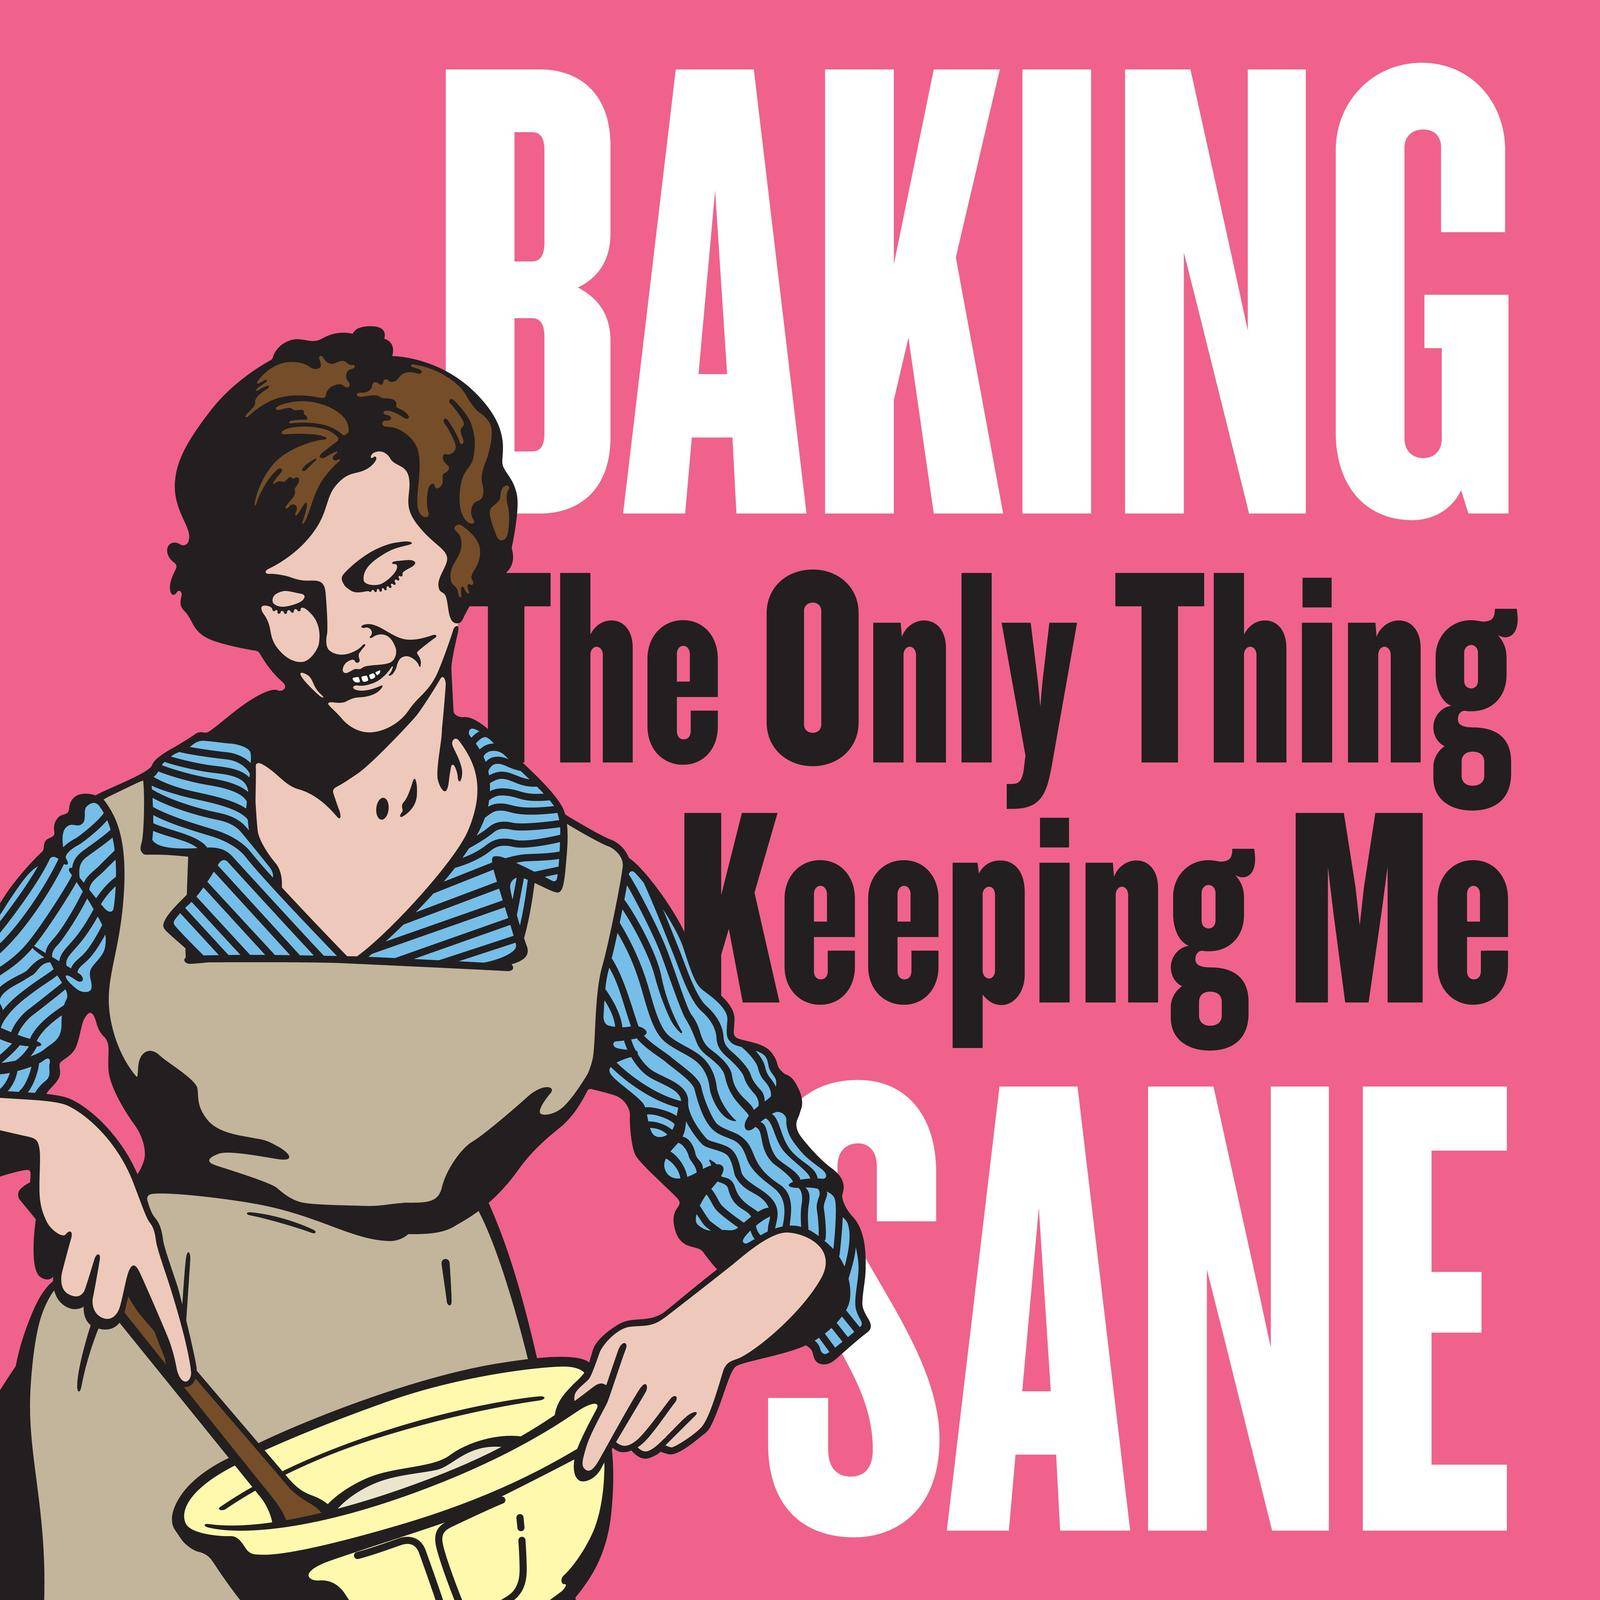 Baking, the only thing keeping me sane, vintage style badge or emblem. by fiftyfootelvis